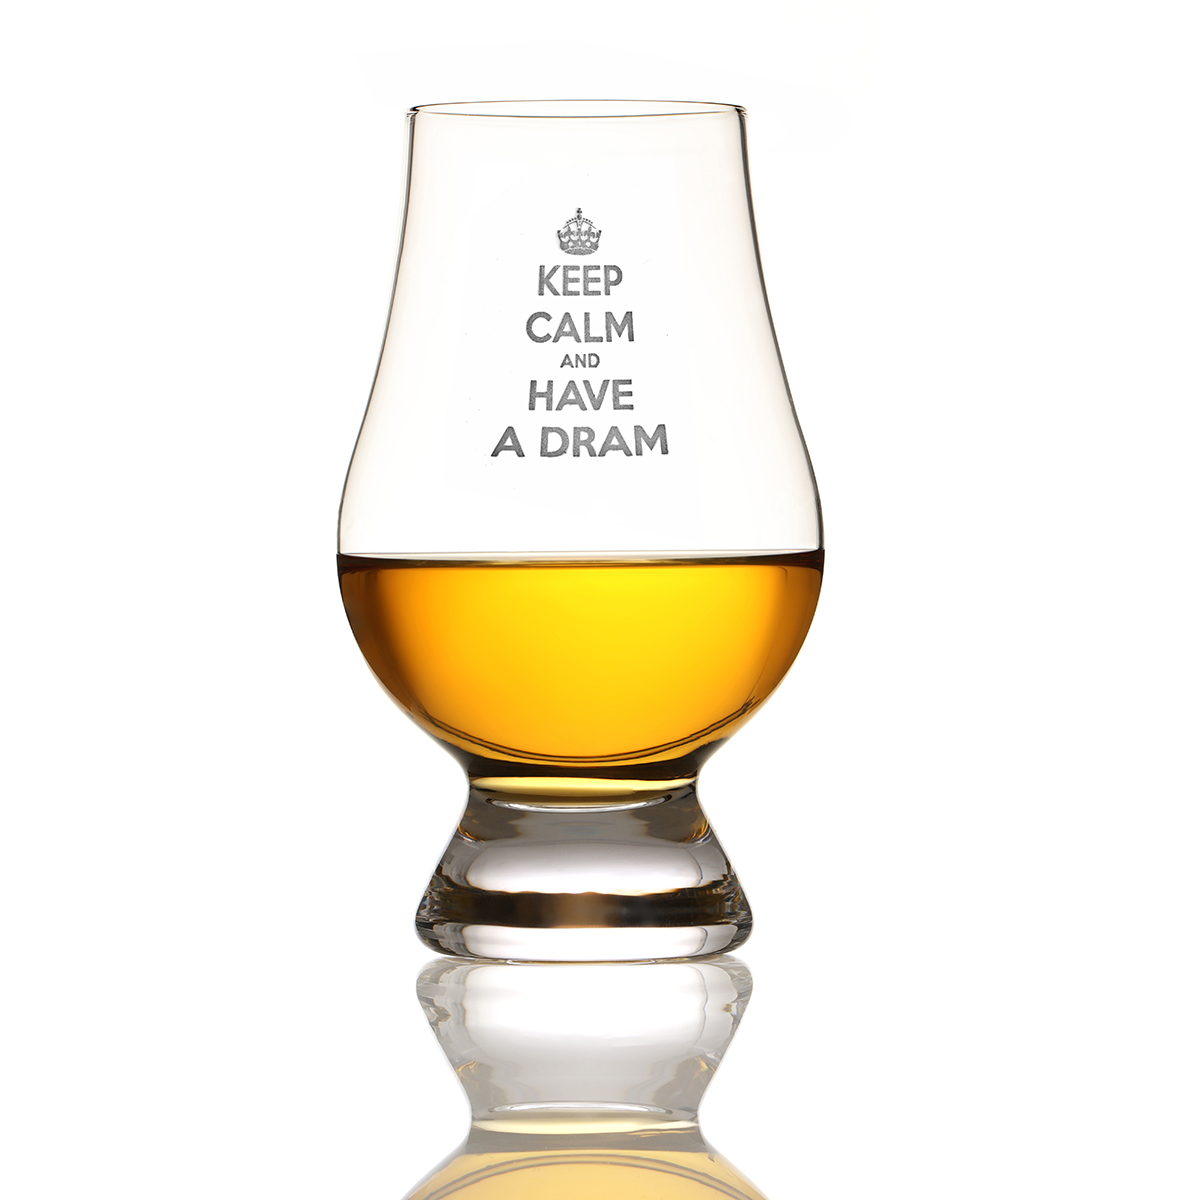 Glencairn Whisky Glas mit Gravur " Keep Calm and have a Dram"